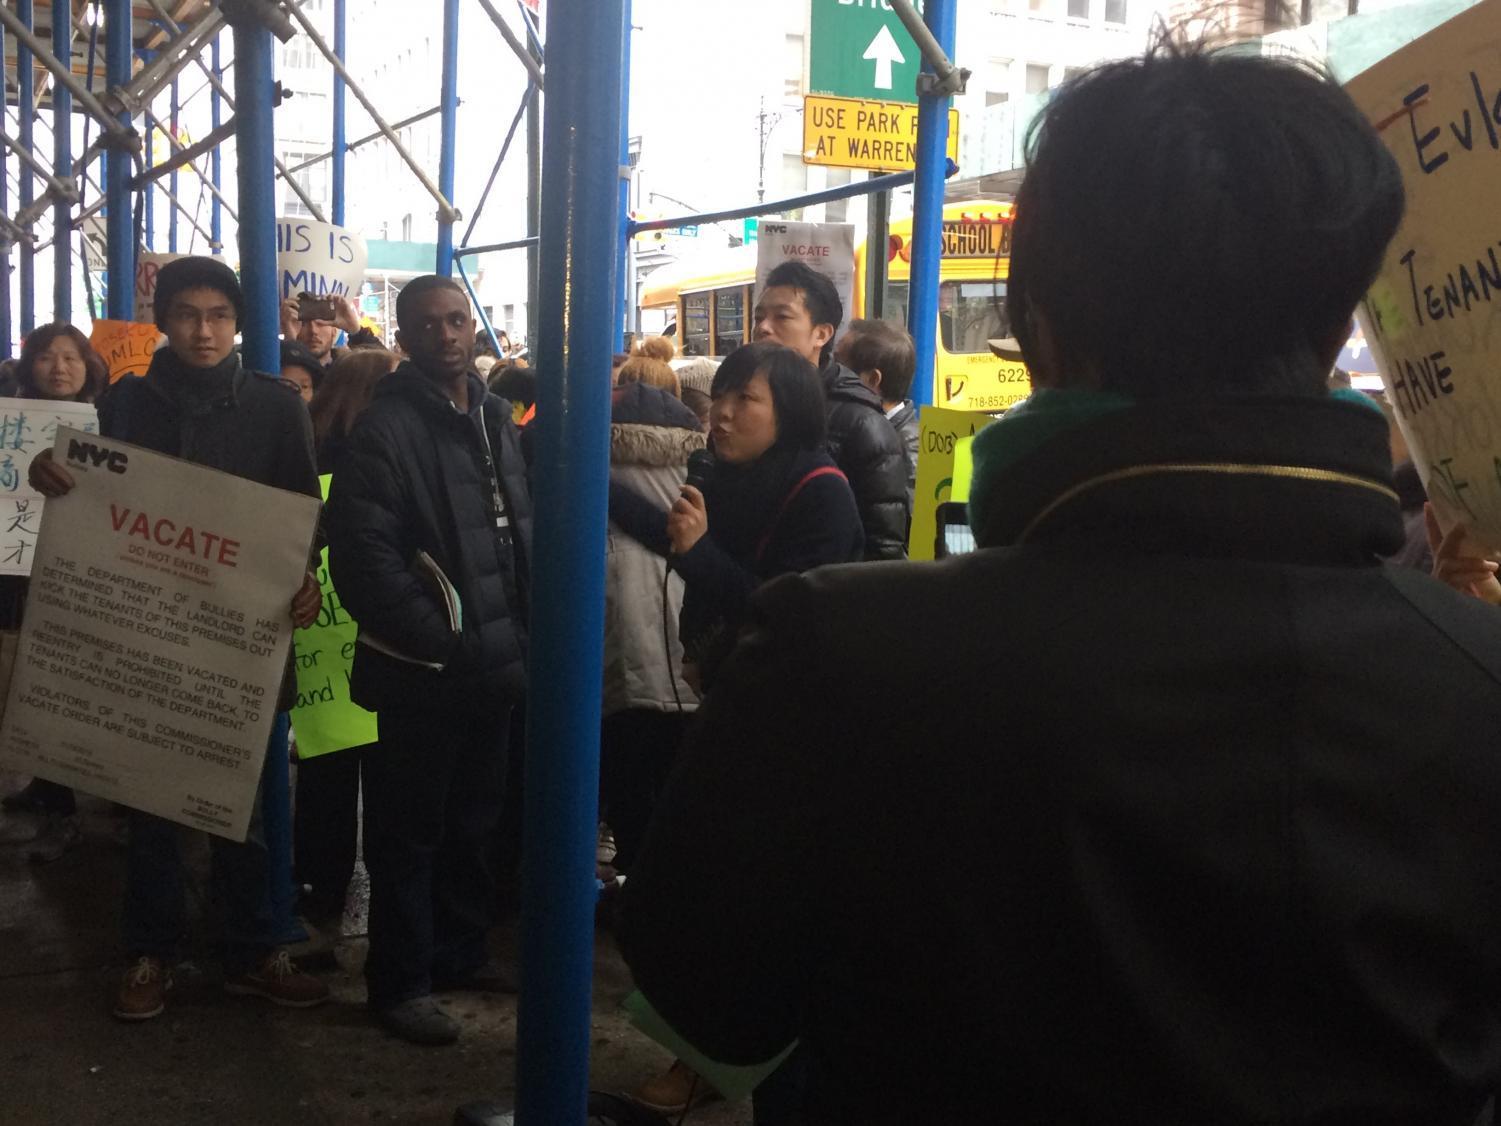 Evicted+85+Bowery+Tenants+Protest+Outside+Department+of+Buildings+Office